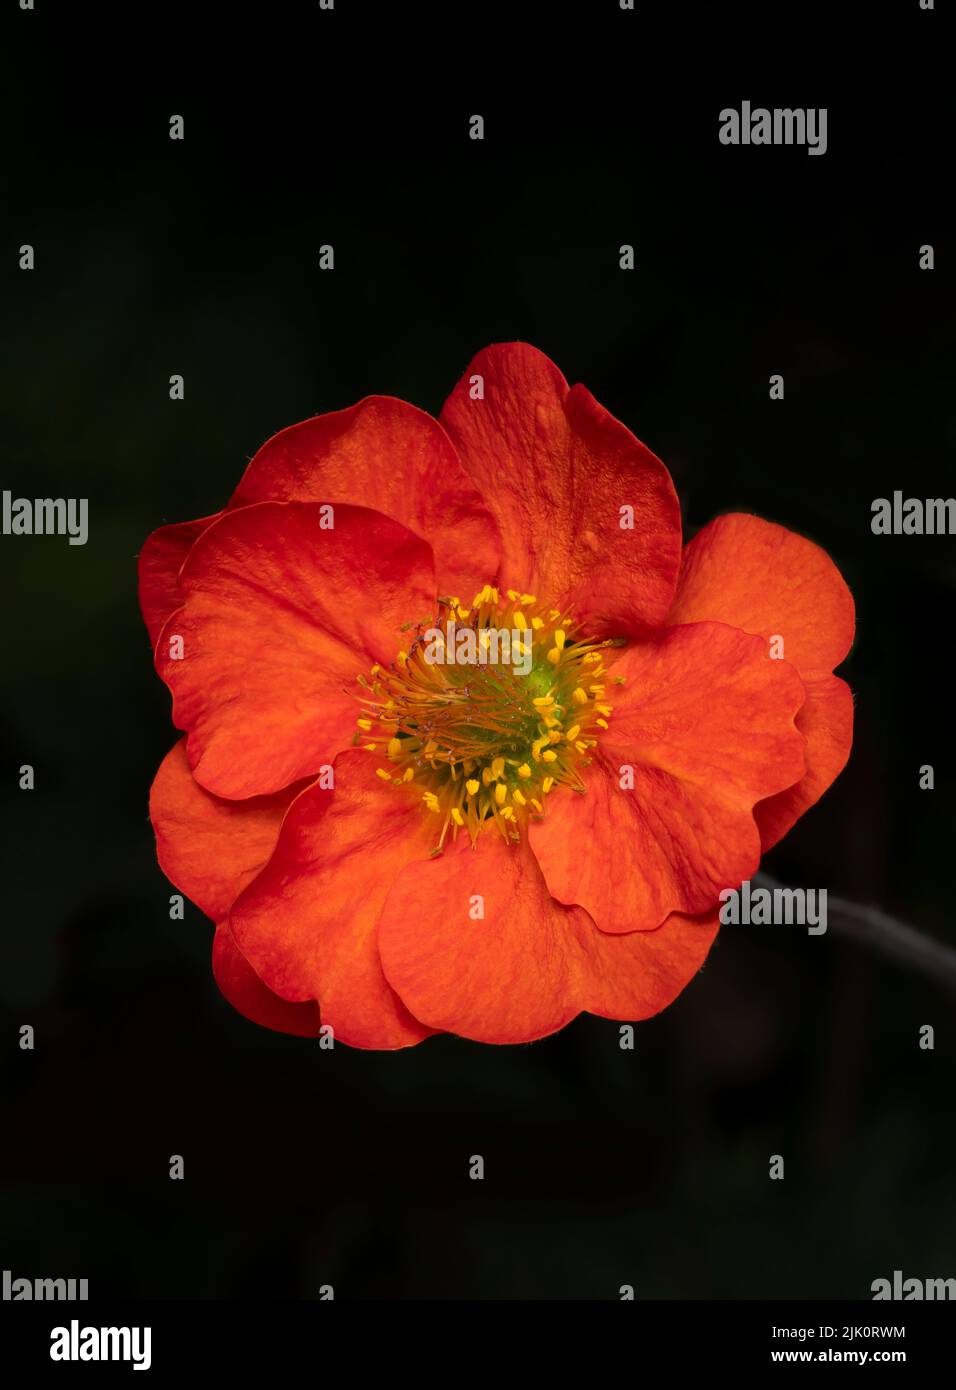 A close up of a beautiful, bright red, Geum flower, photographed against a dark background Stock Photo